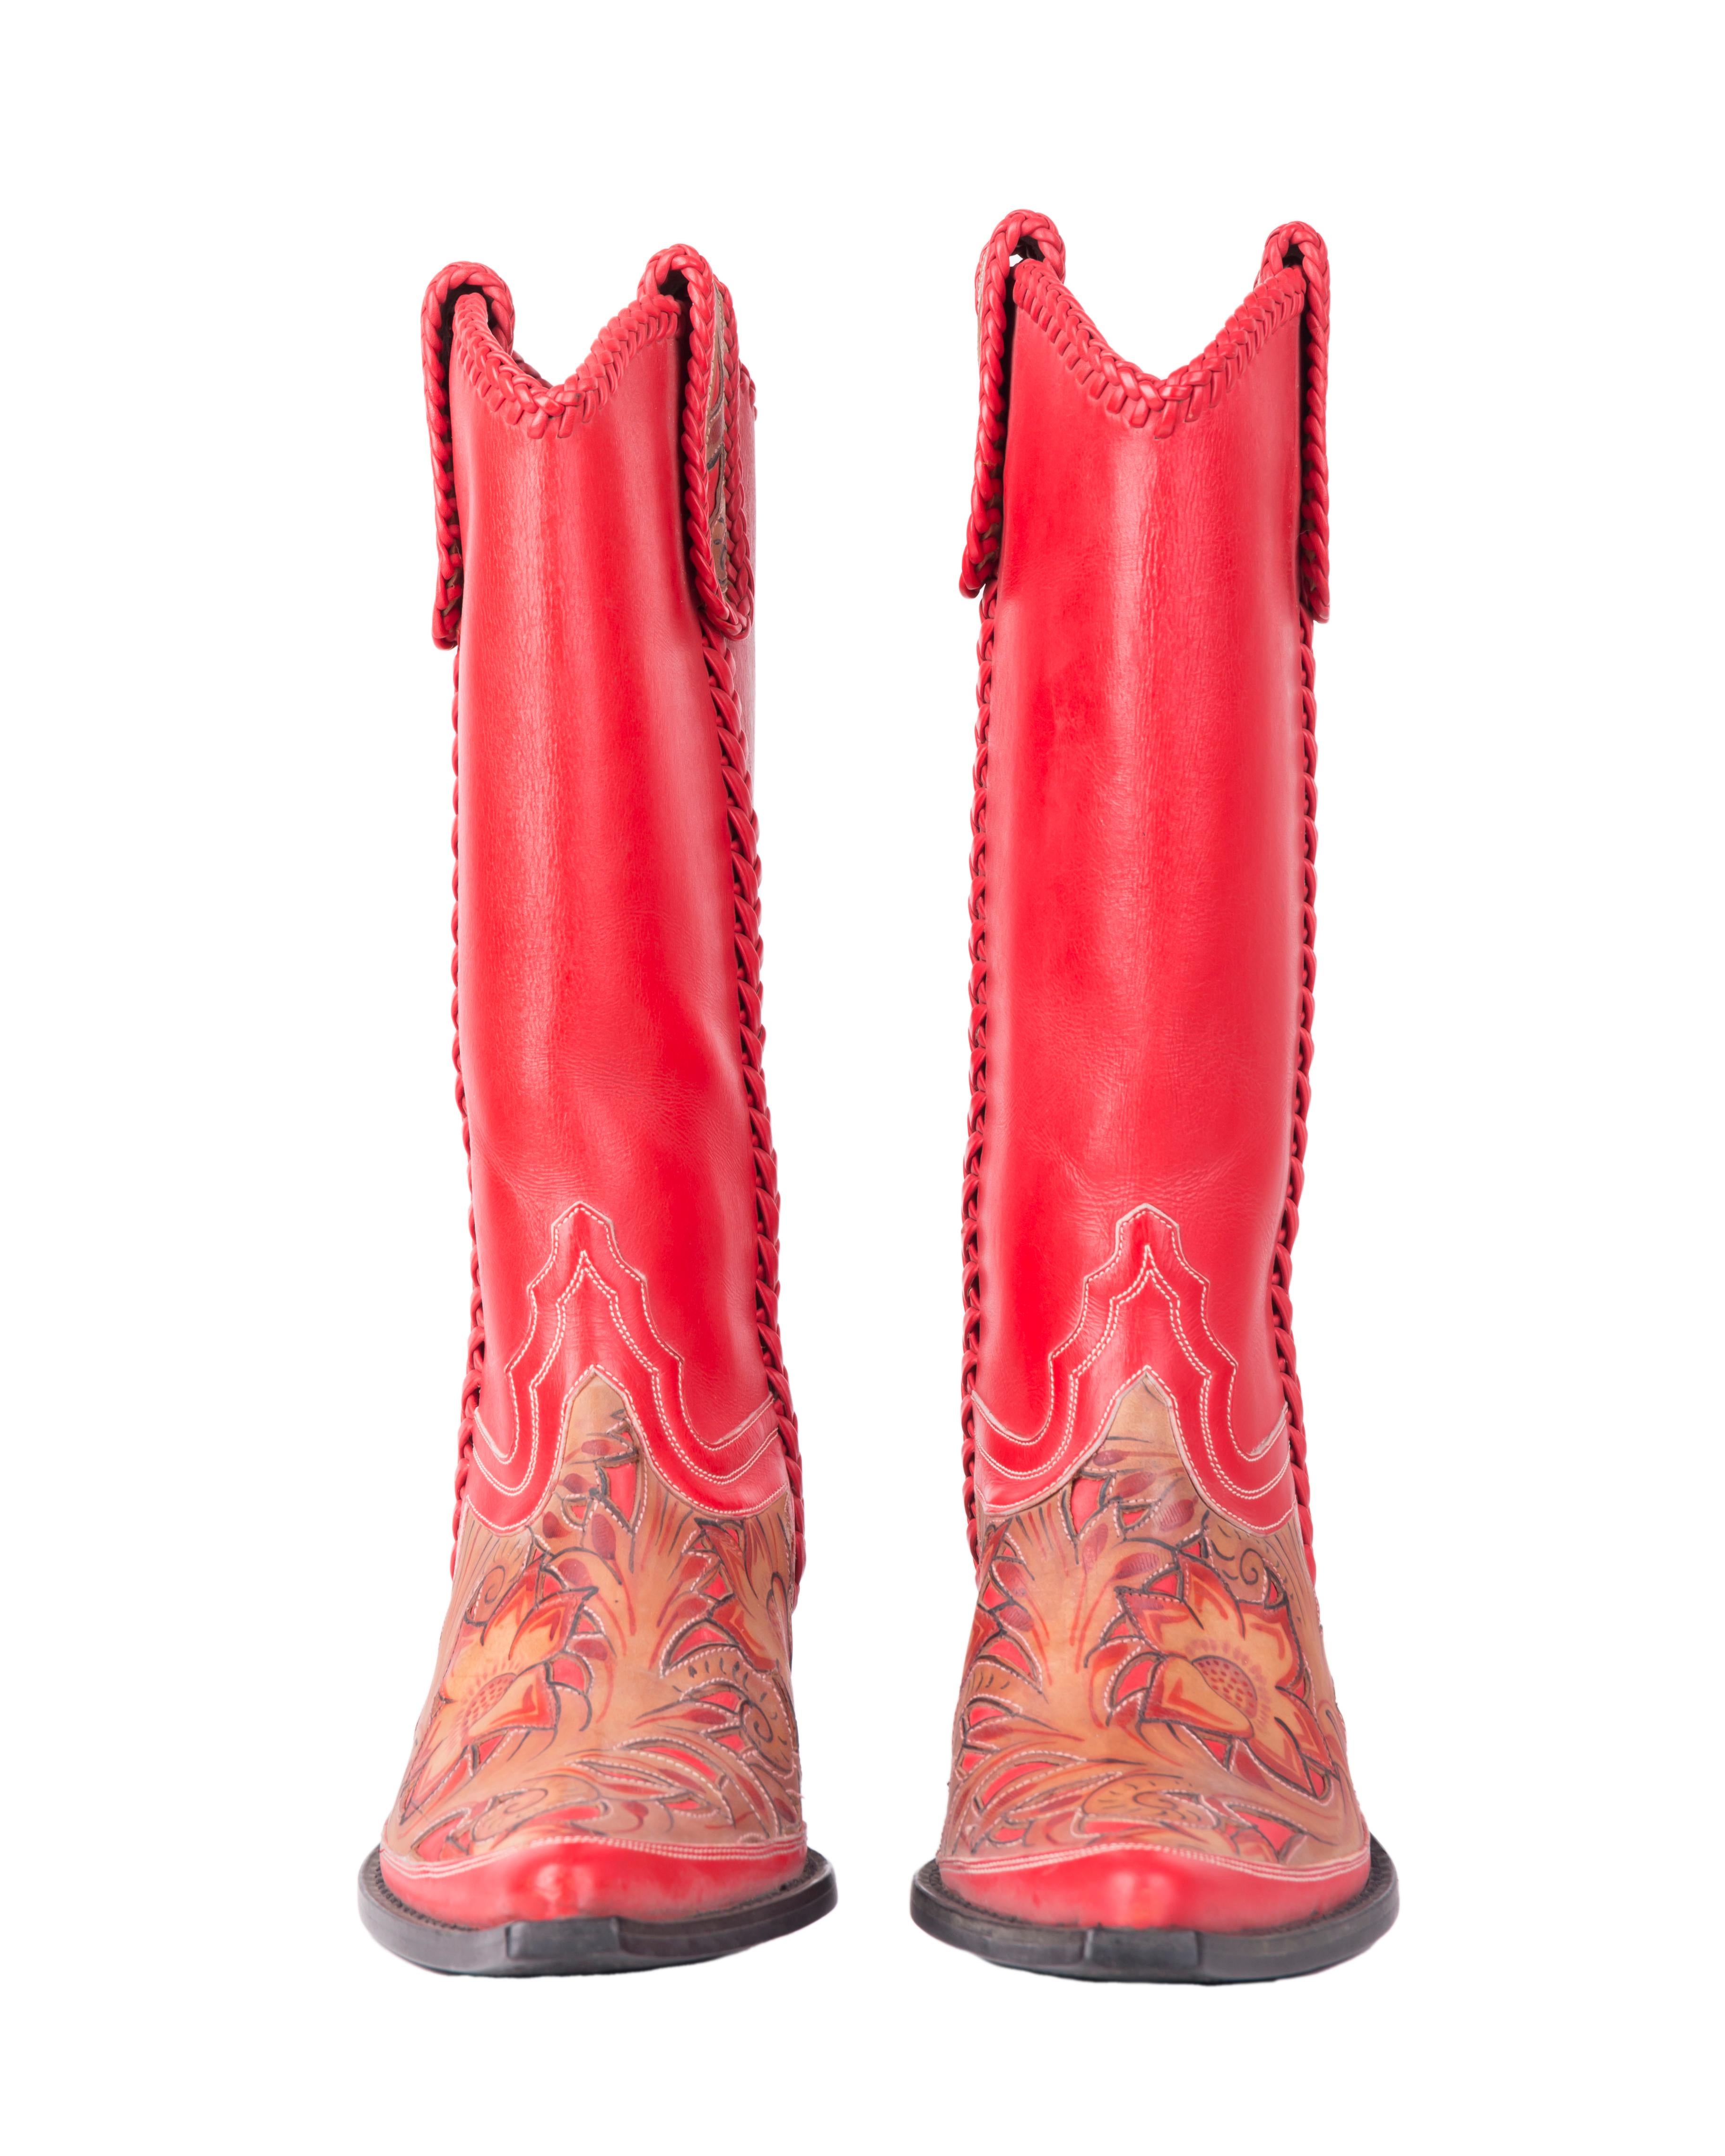 - Blumarine by Anna Molinari
- Red leather boots
- Floral hand painted motif
- New, never worn 
- Size 37